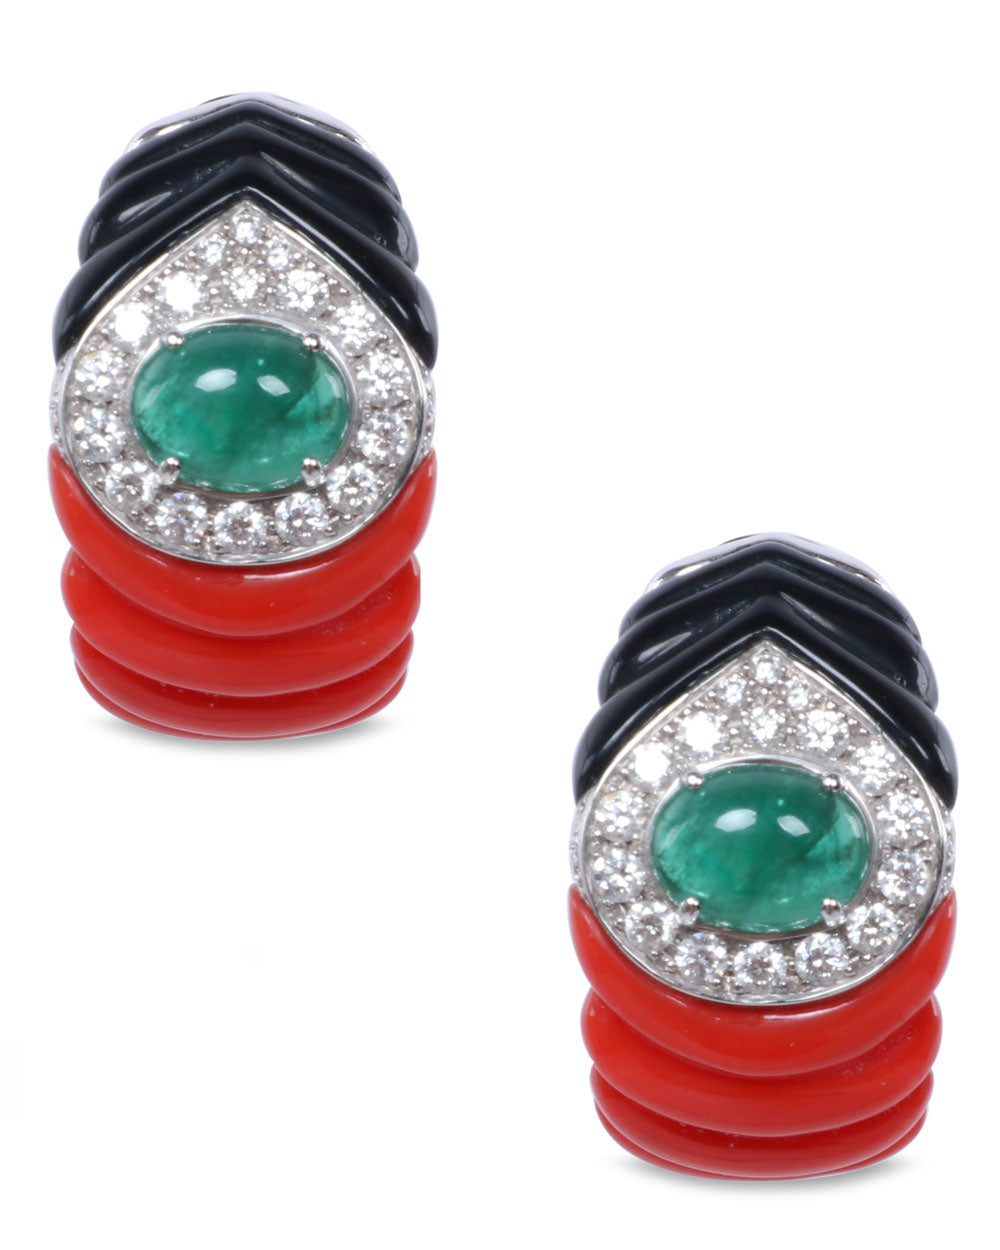 Diamond and Emerald Coral Earrings